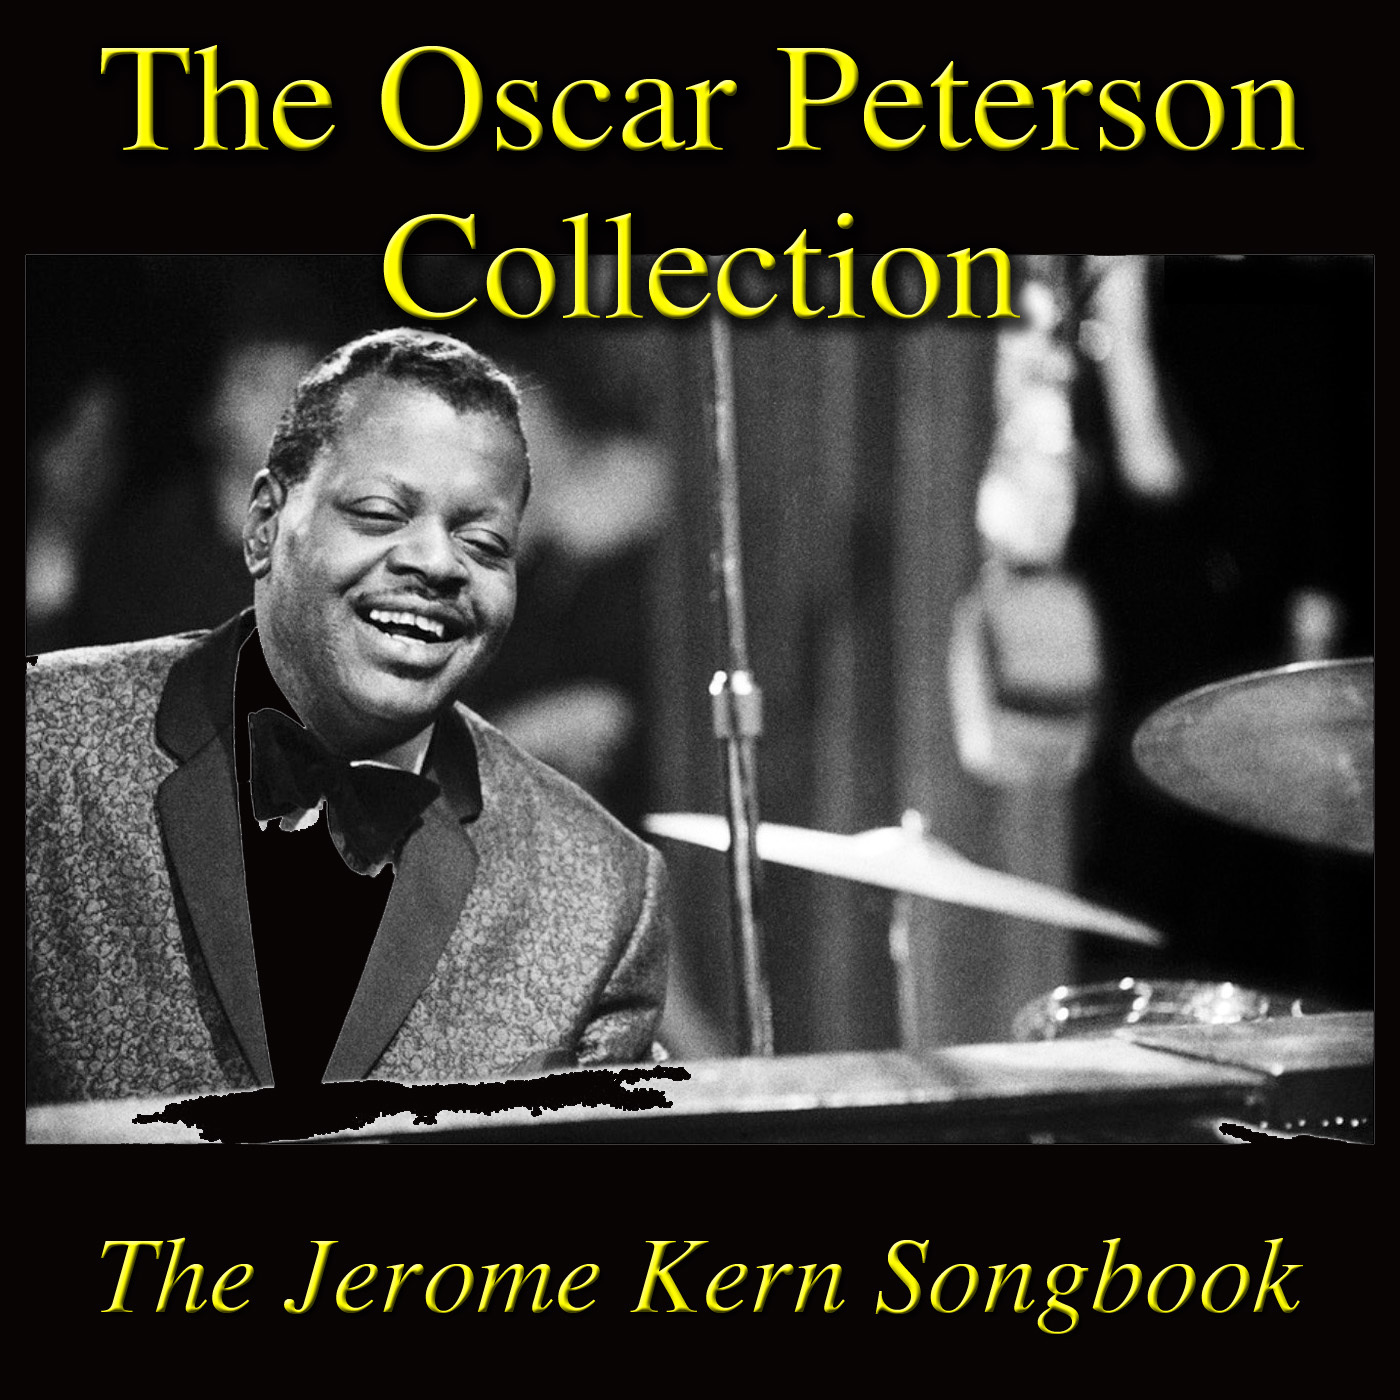 The Oscar Peterson Collection: The Jerome Kern Songbook